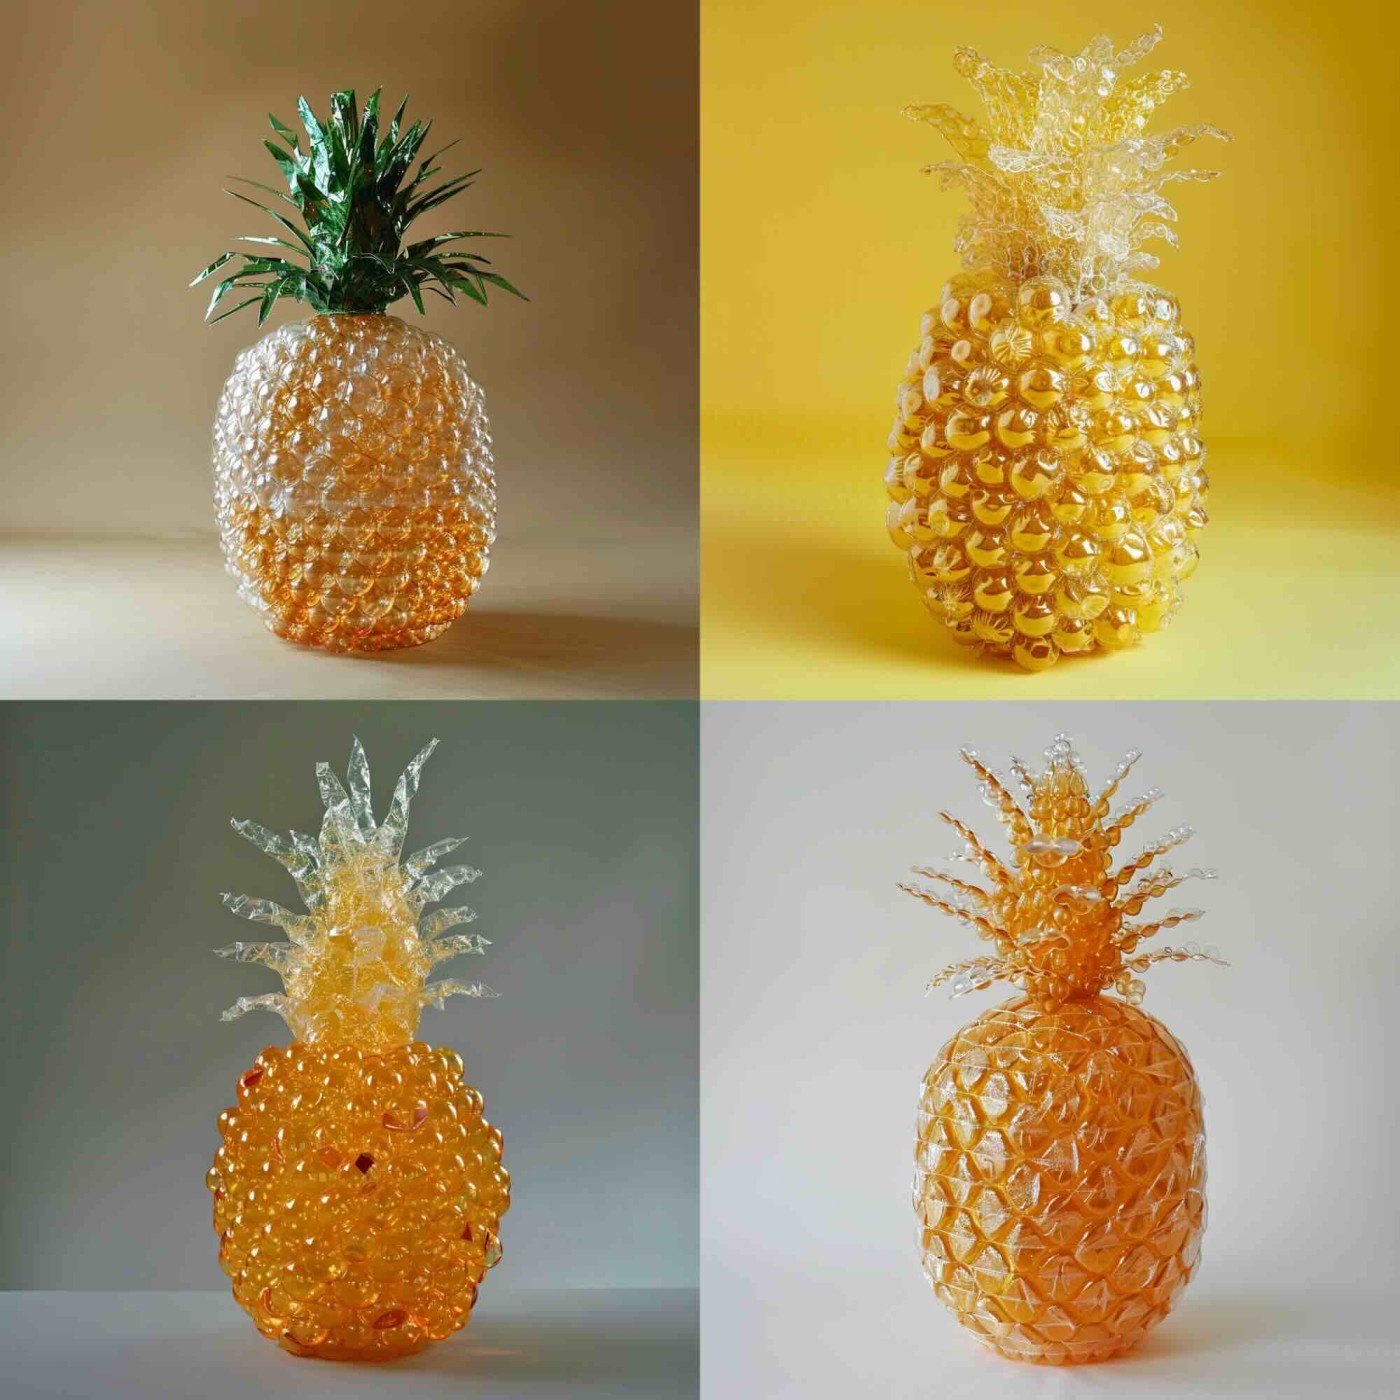 A pineapple made of bubble wrap